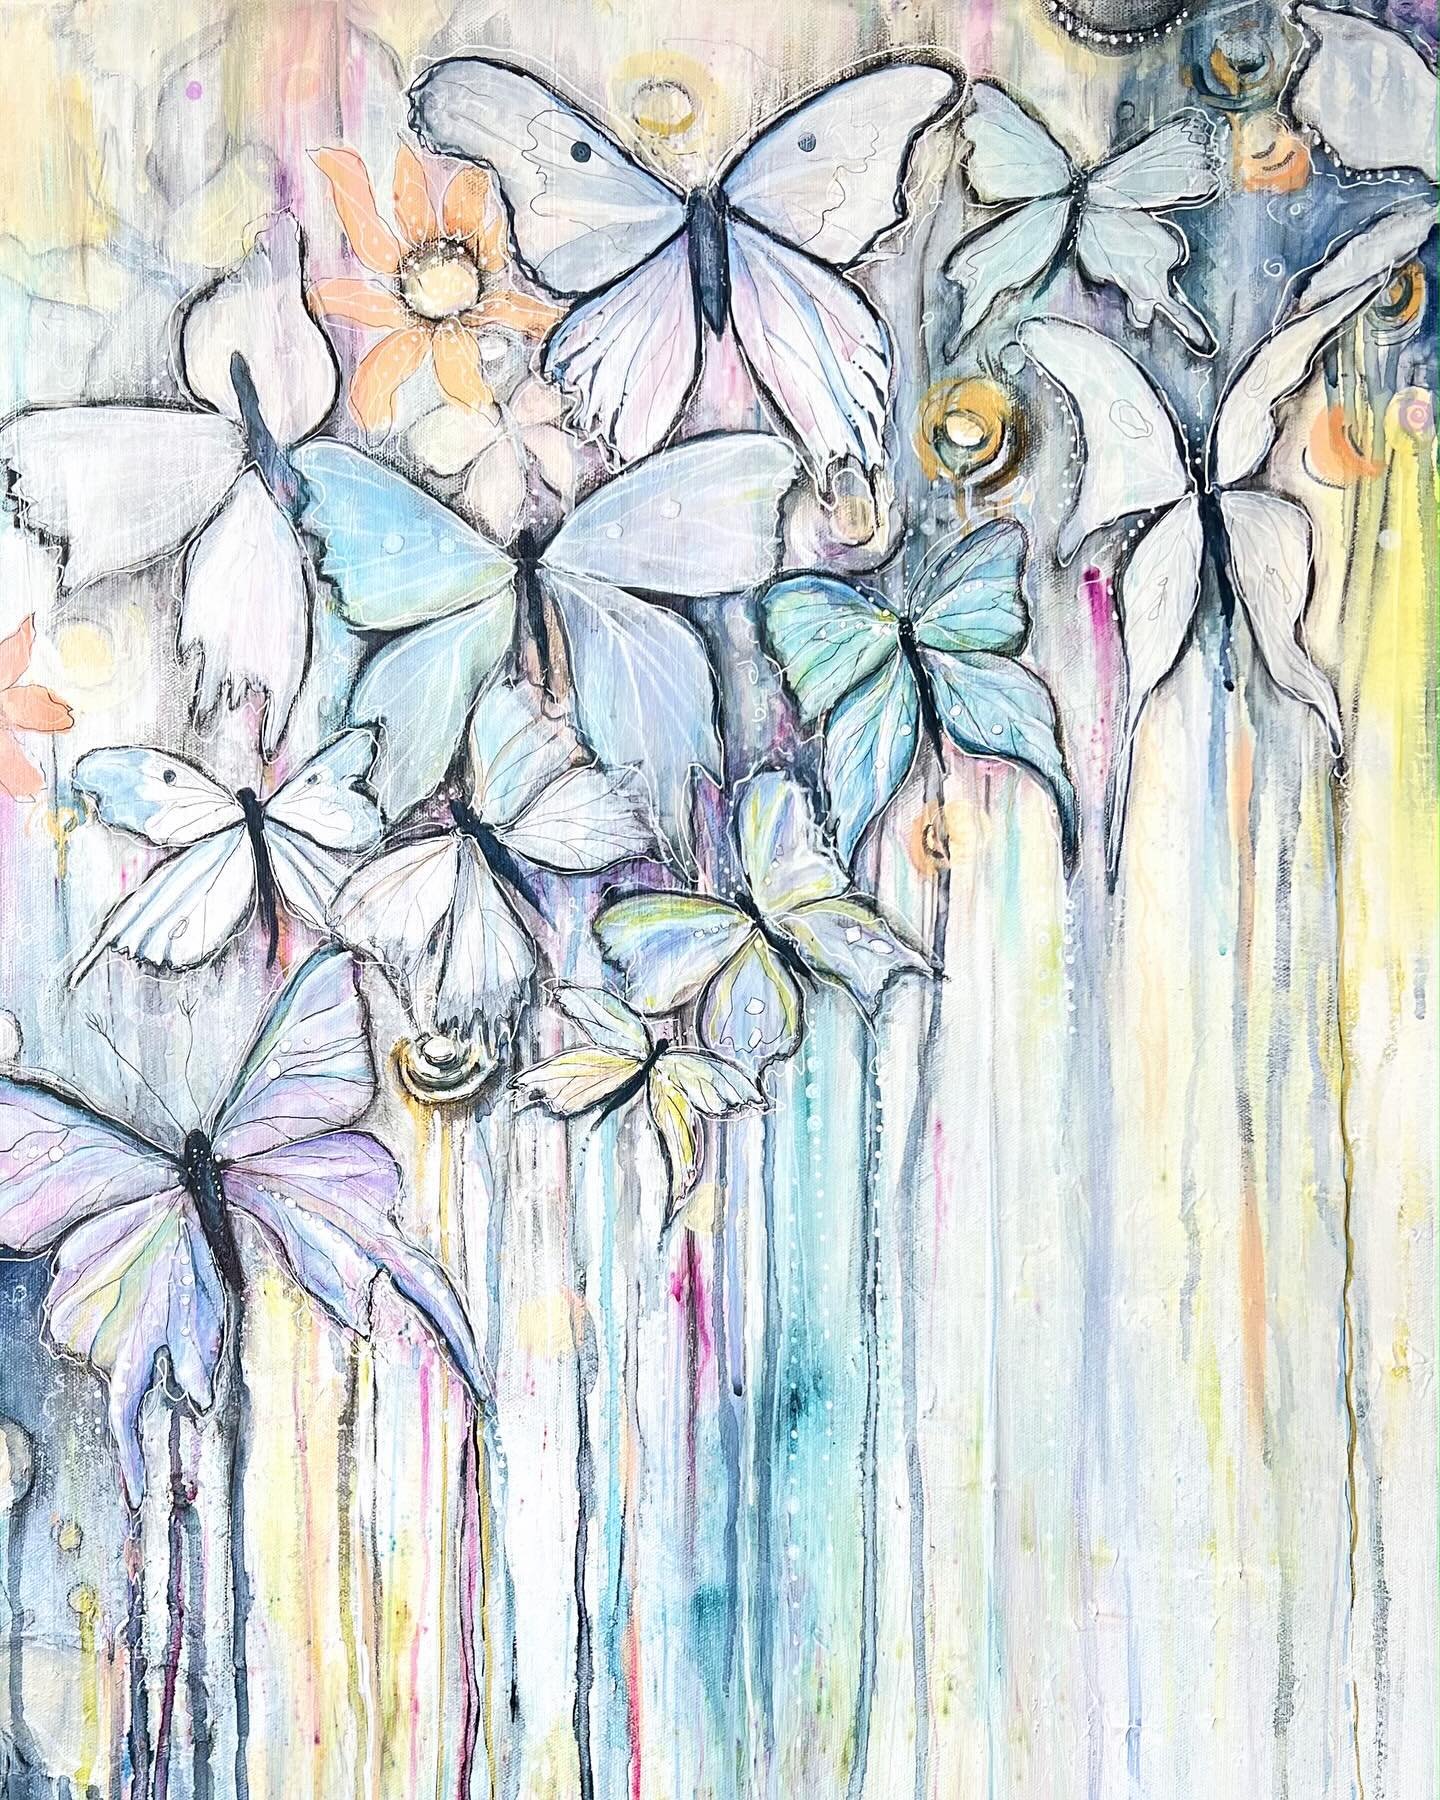 Sold! thank you so much to the collector that purchased this special work. &ldquo;Trail of Hope&rdquo; was in the 2024 Bryn Du Art Show, which was an honor. Now these butterflies have flown off to their new home. 

I will miss this piece. It was very